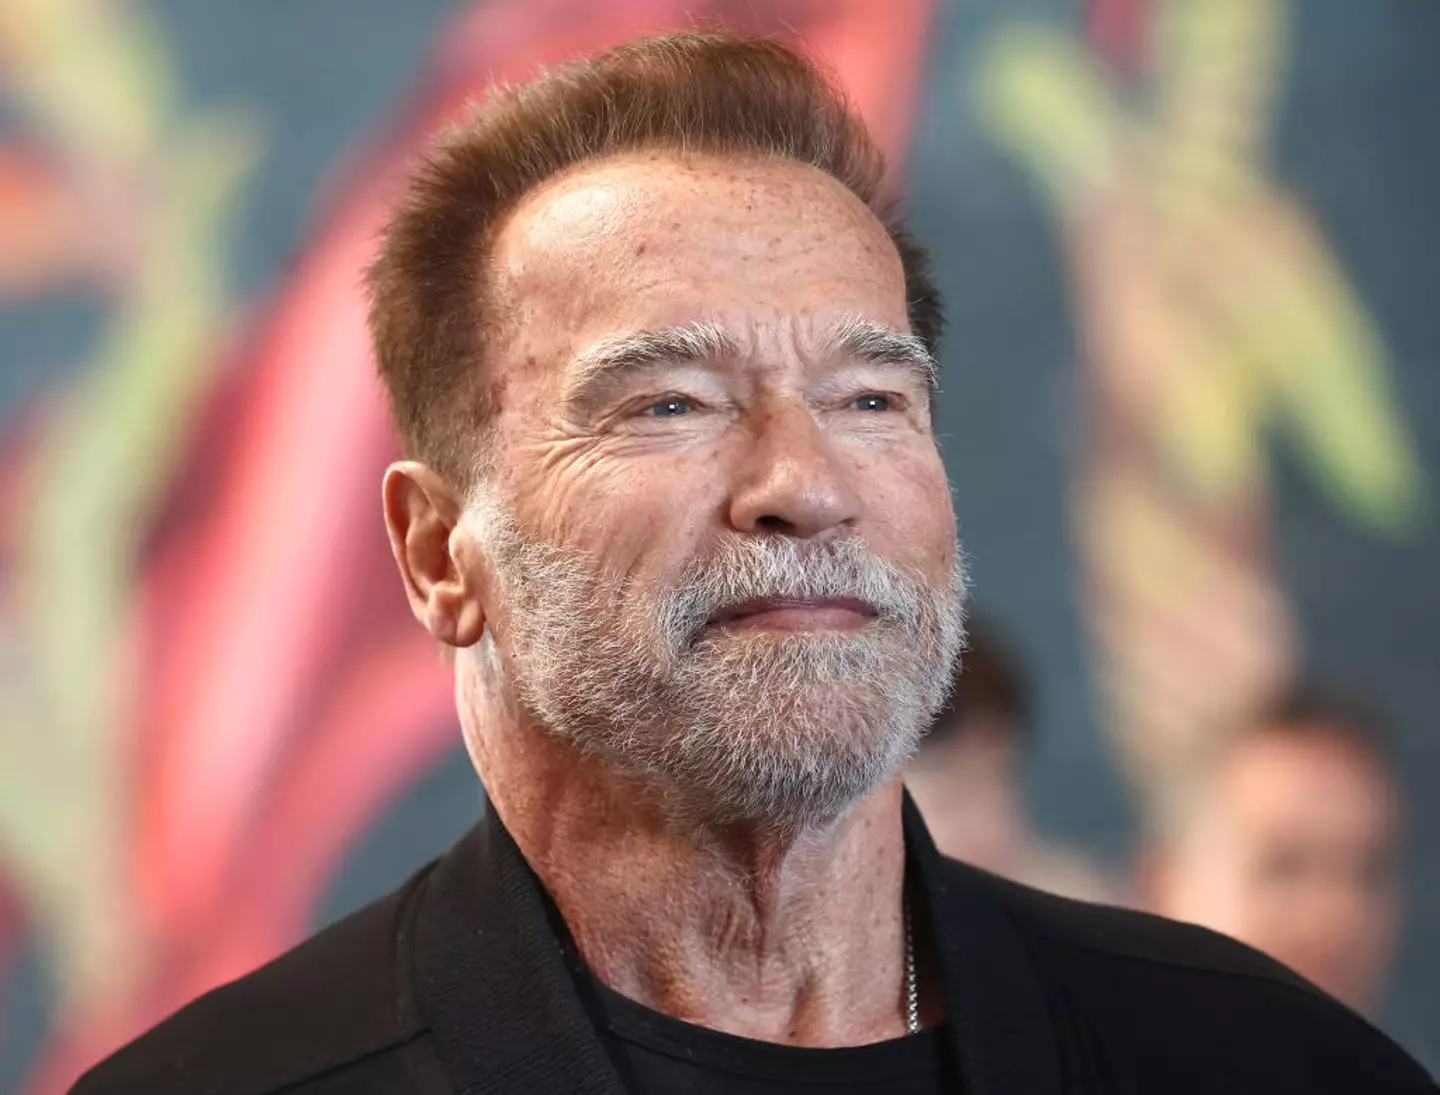 Arnold Schwarzenegger has revealed how he almost died during his open heart surgery.